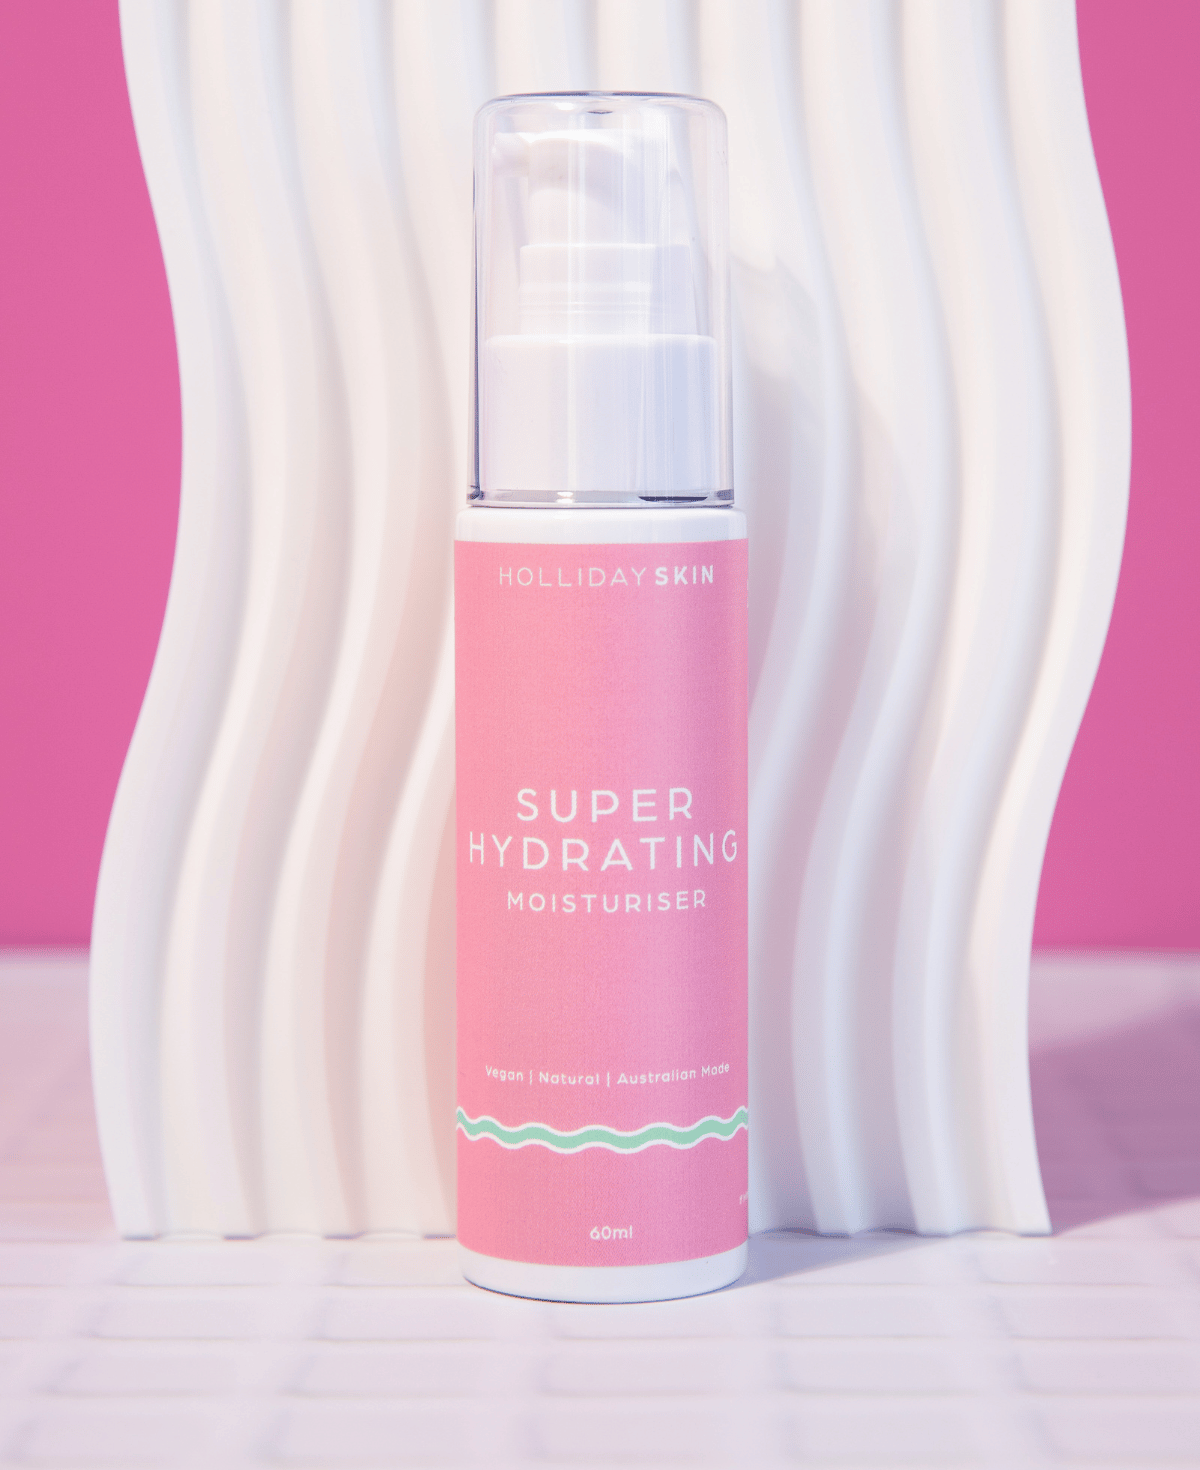 Super Hydrating Moisturiser that doesn't clog your pores